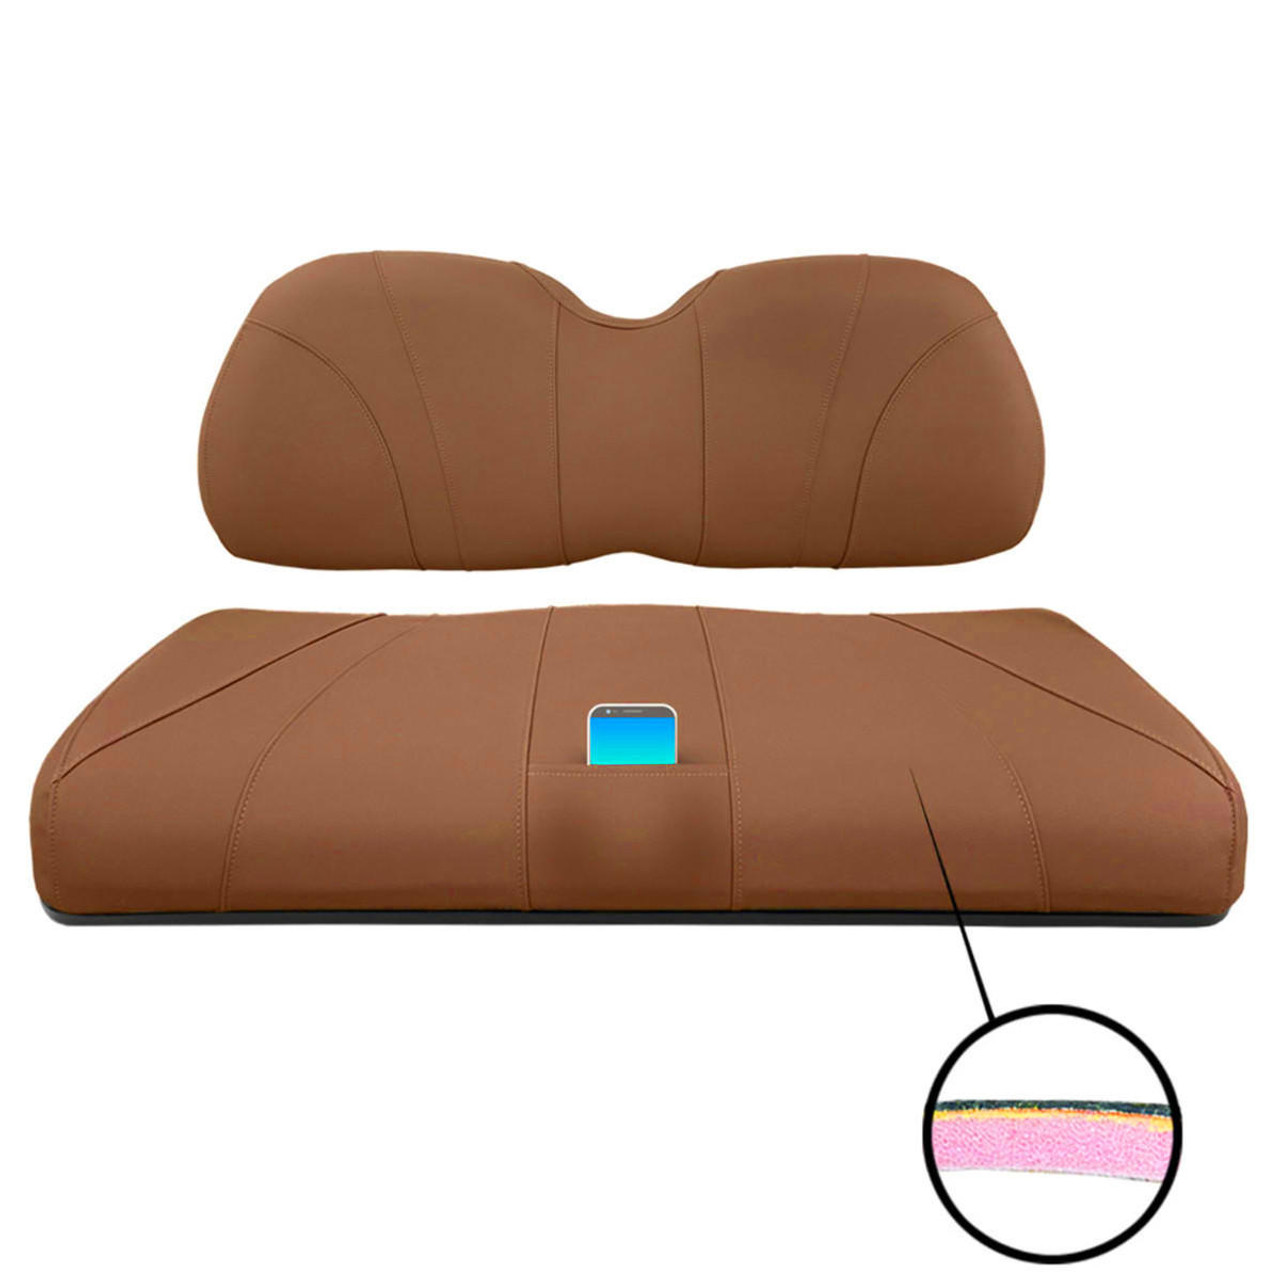  ProFormX Slipstream Front & Rear Seat Cover Set (Triple Chestnut) - Fits Precedent-Tempo-Onward (2004-Up) 